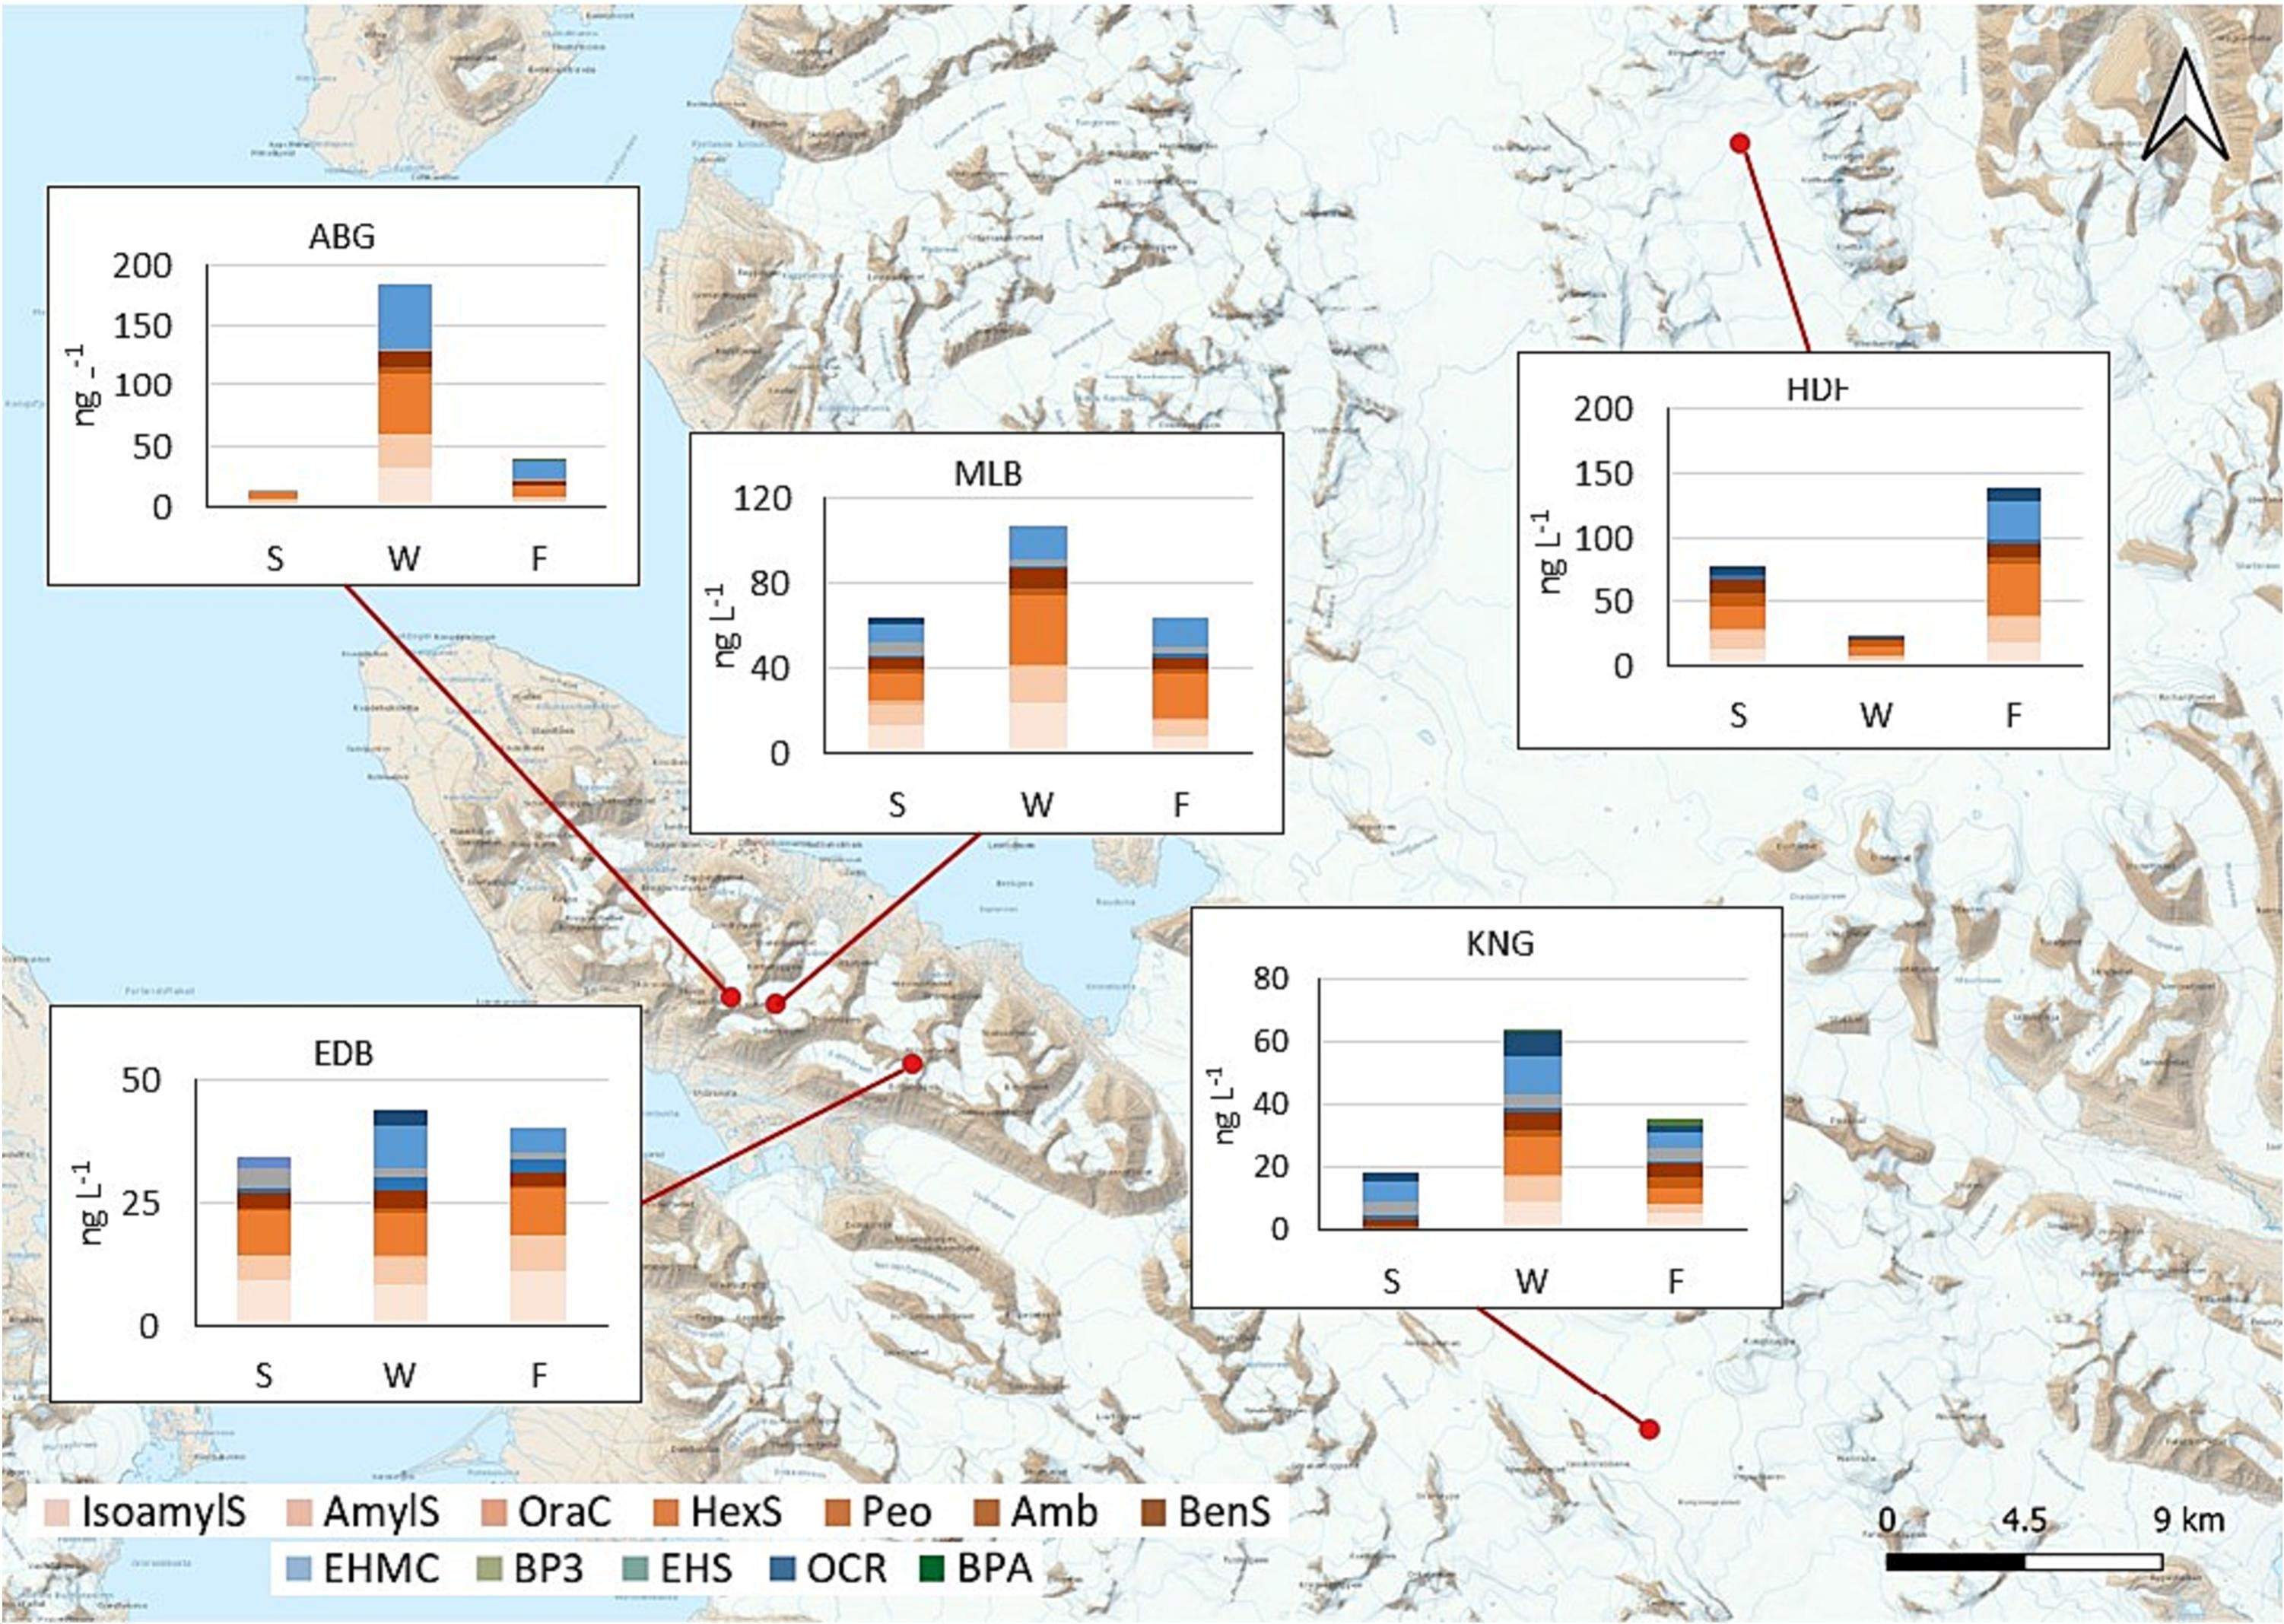 Map showing seasonal distribution of cumulative concentrations of target contaminants in the dissolved phase of snow collected in snow pits at the top of each glacier in the snowpack on north-western Spitsbergen. Spring – S; Winter – W; Fall – F. BP3 and BPA not displayed in the HDF S sample. Graphic: D'Amico, et al., 2023 / Science of The Total Environment